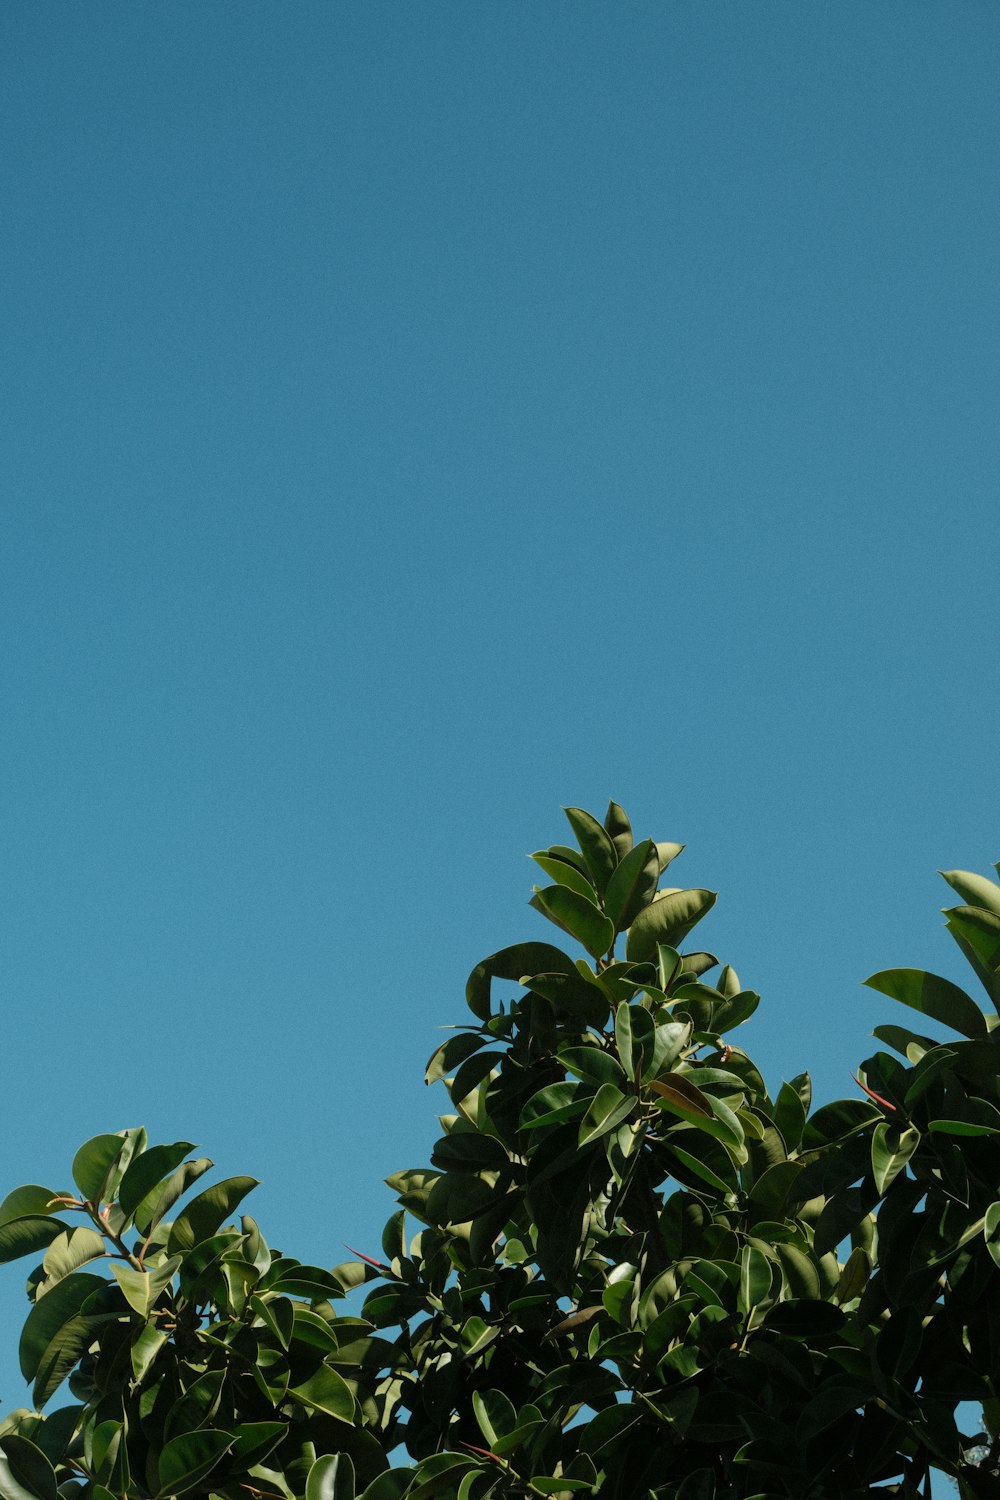 a plane flying over a tree with a blue sky in the background